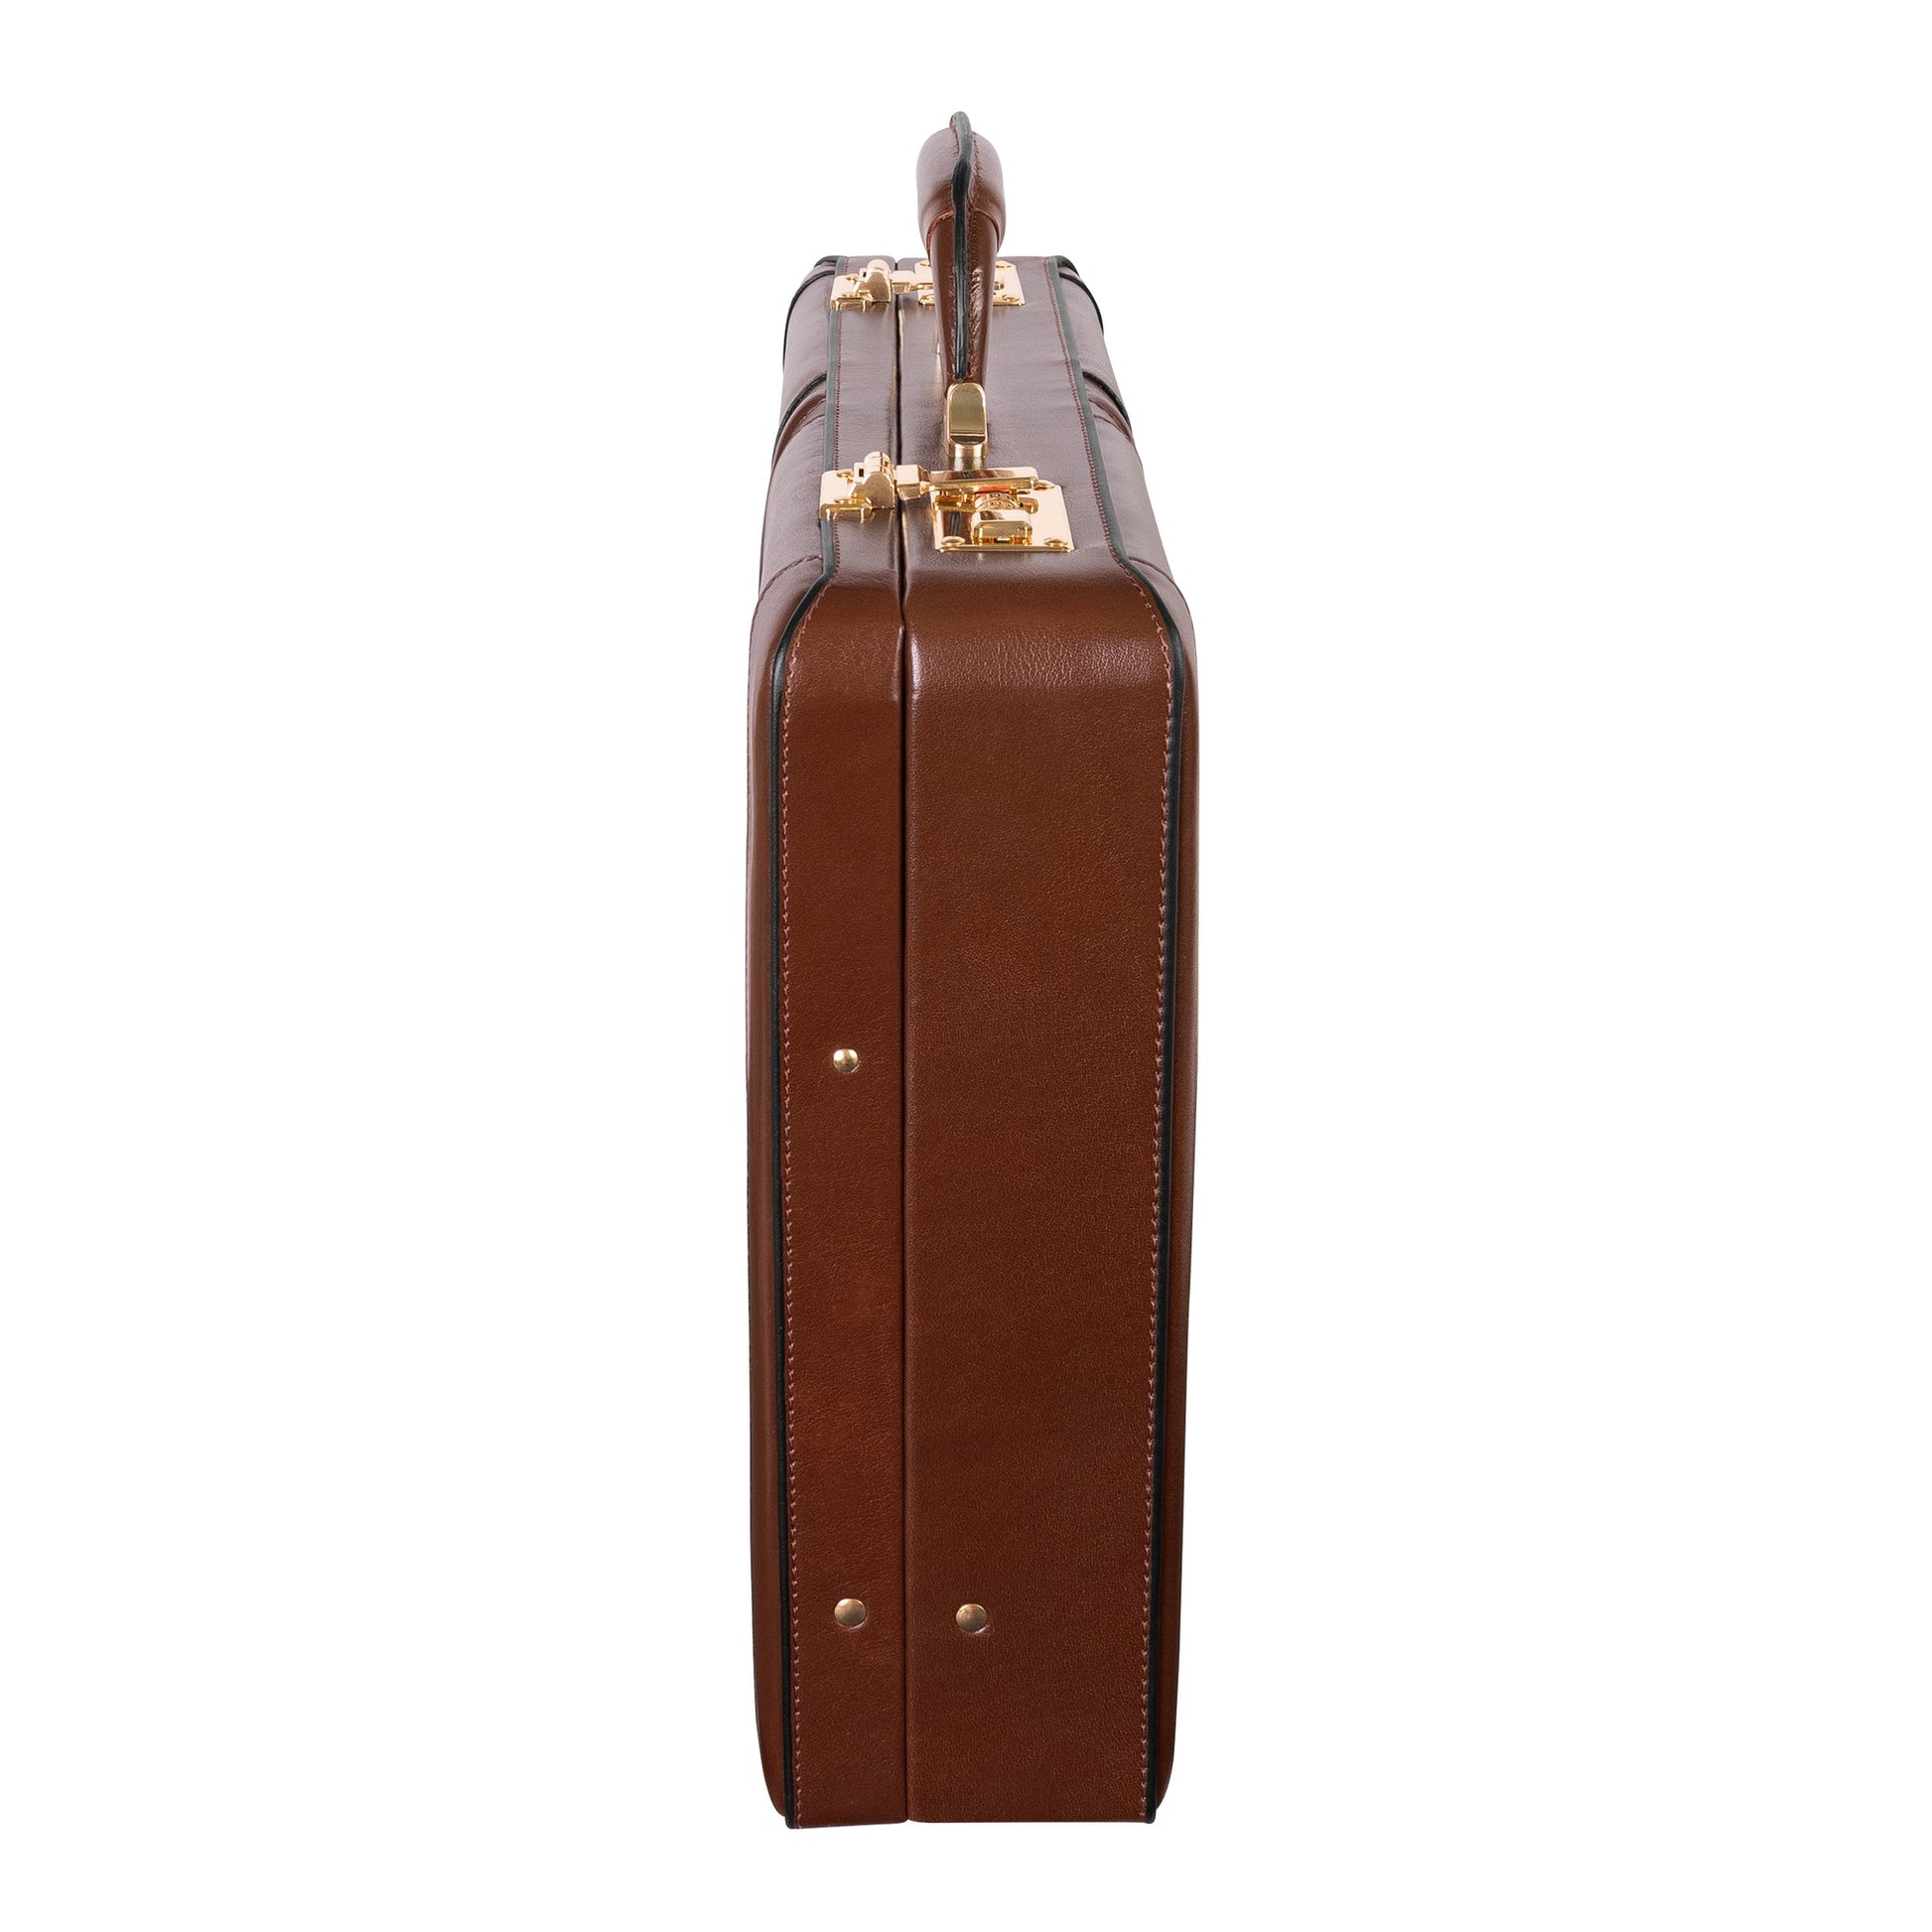 Genuine Leather Attache Briefcase for Men's Leather Executive